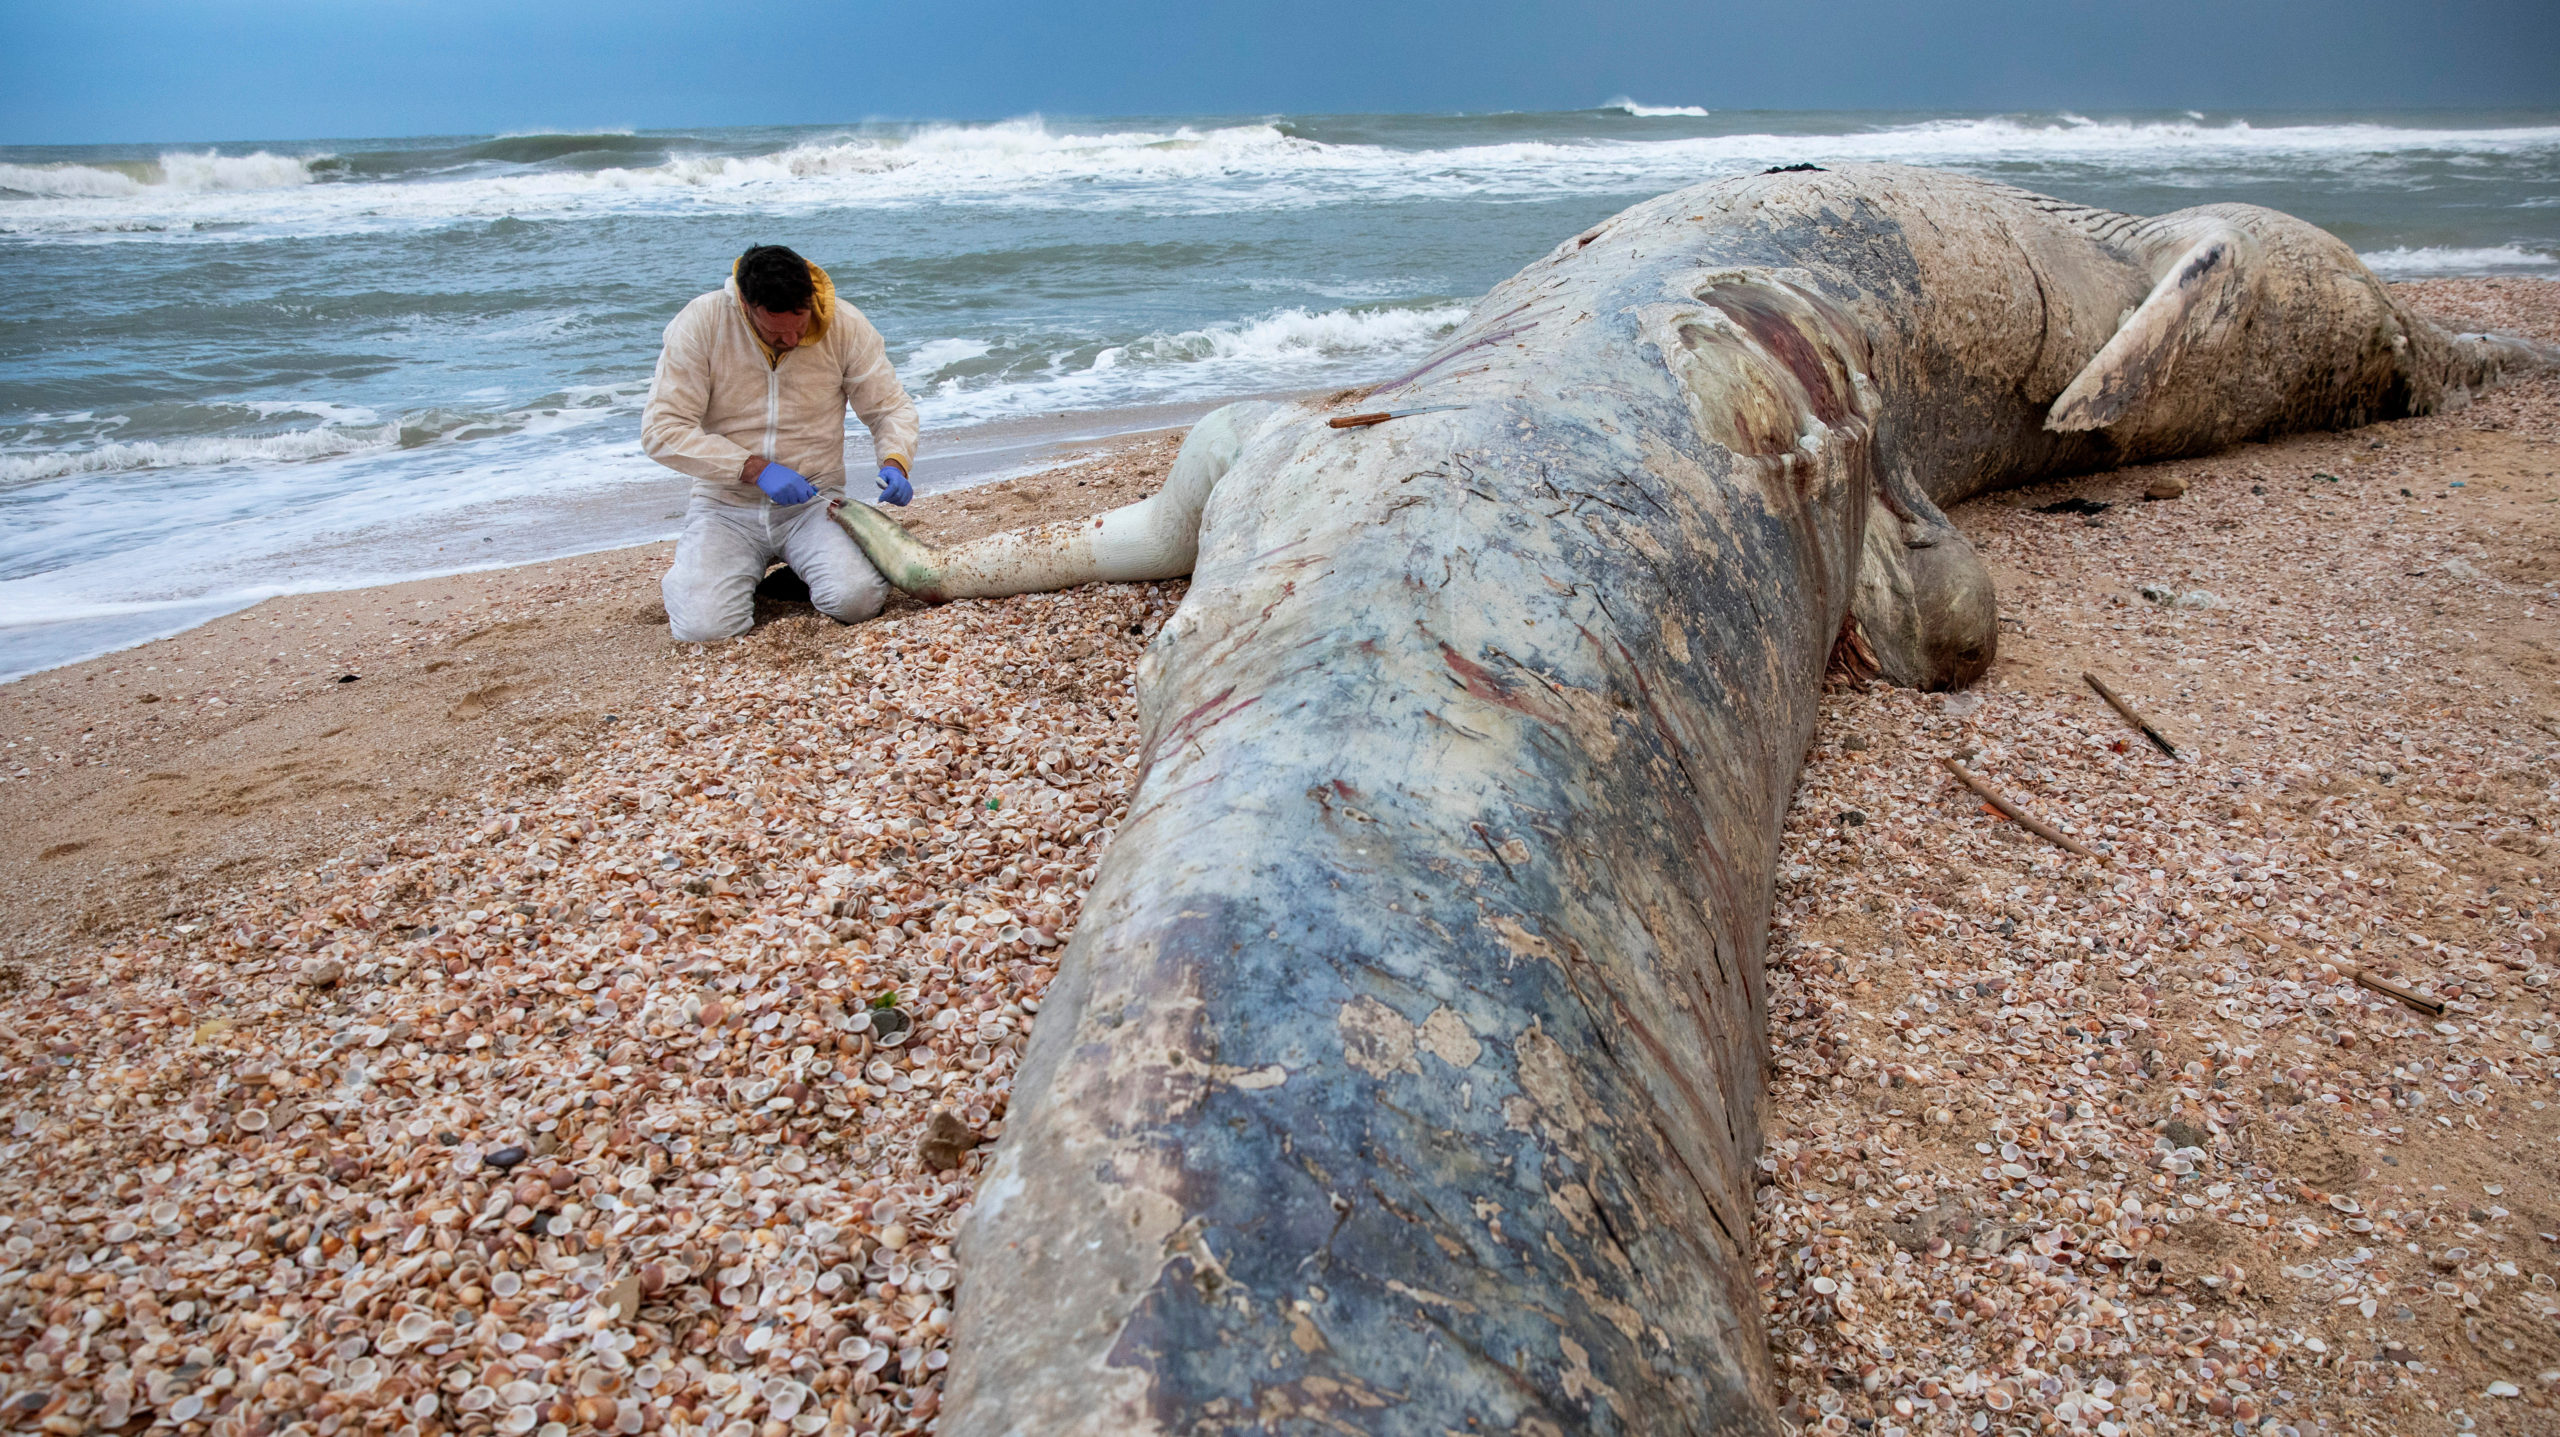 A marine veterinarian takes samples from a dead fin whale washed up on a beach in Israel. (Photo: Ariel Schalit, AP)